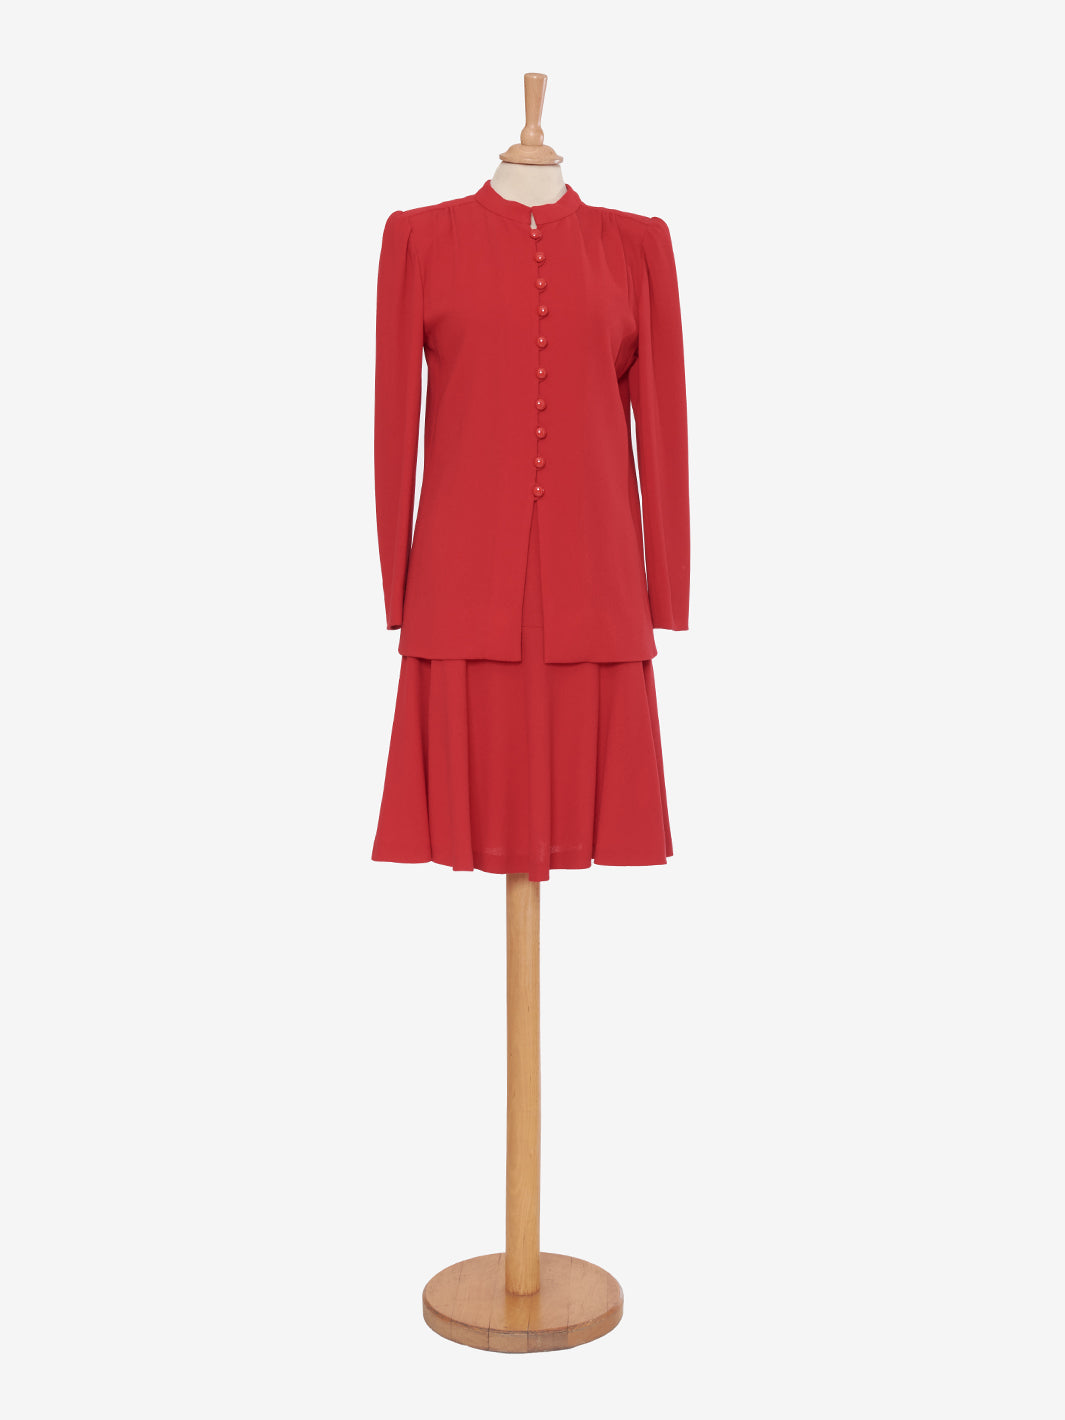 Red wool crepe suit